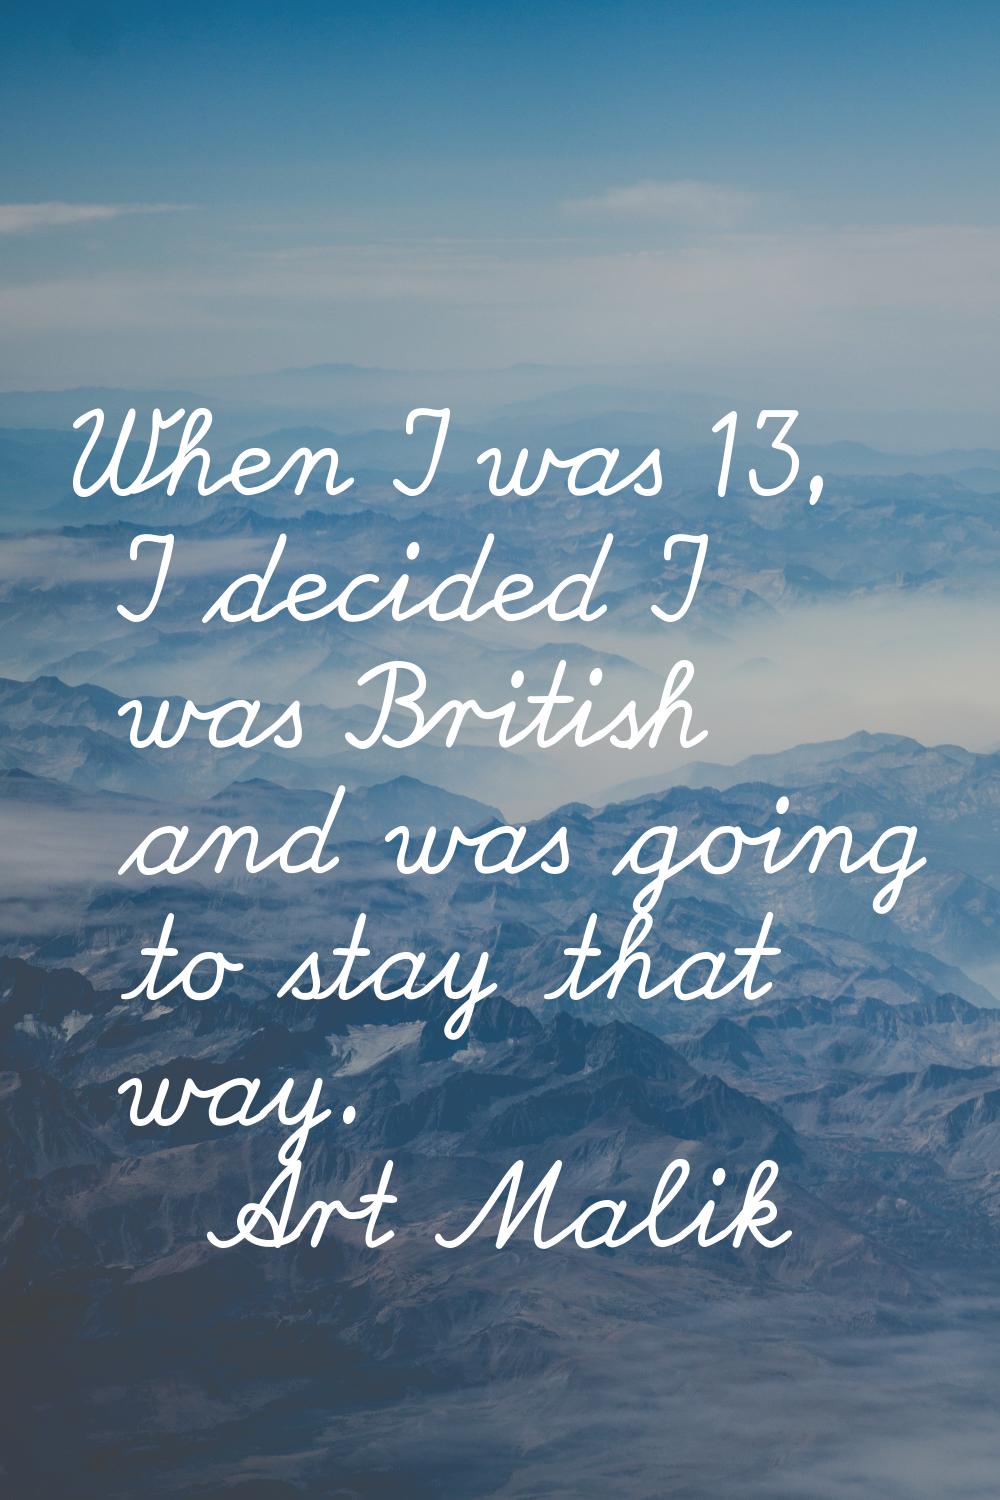 When I was 13, I decided I was British and was going to stay that way.